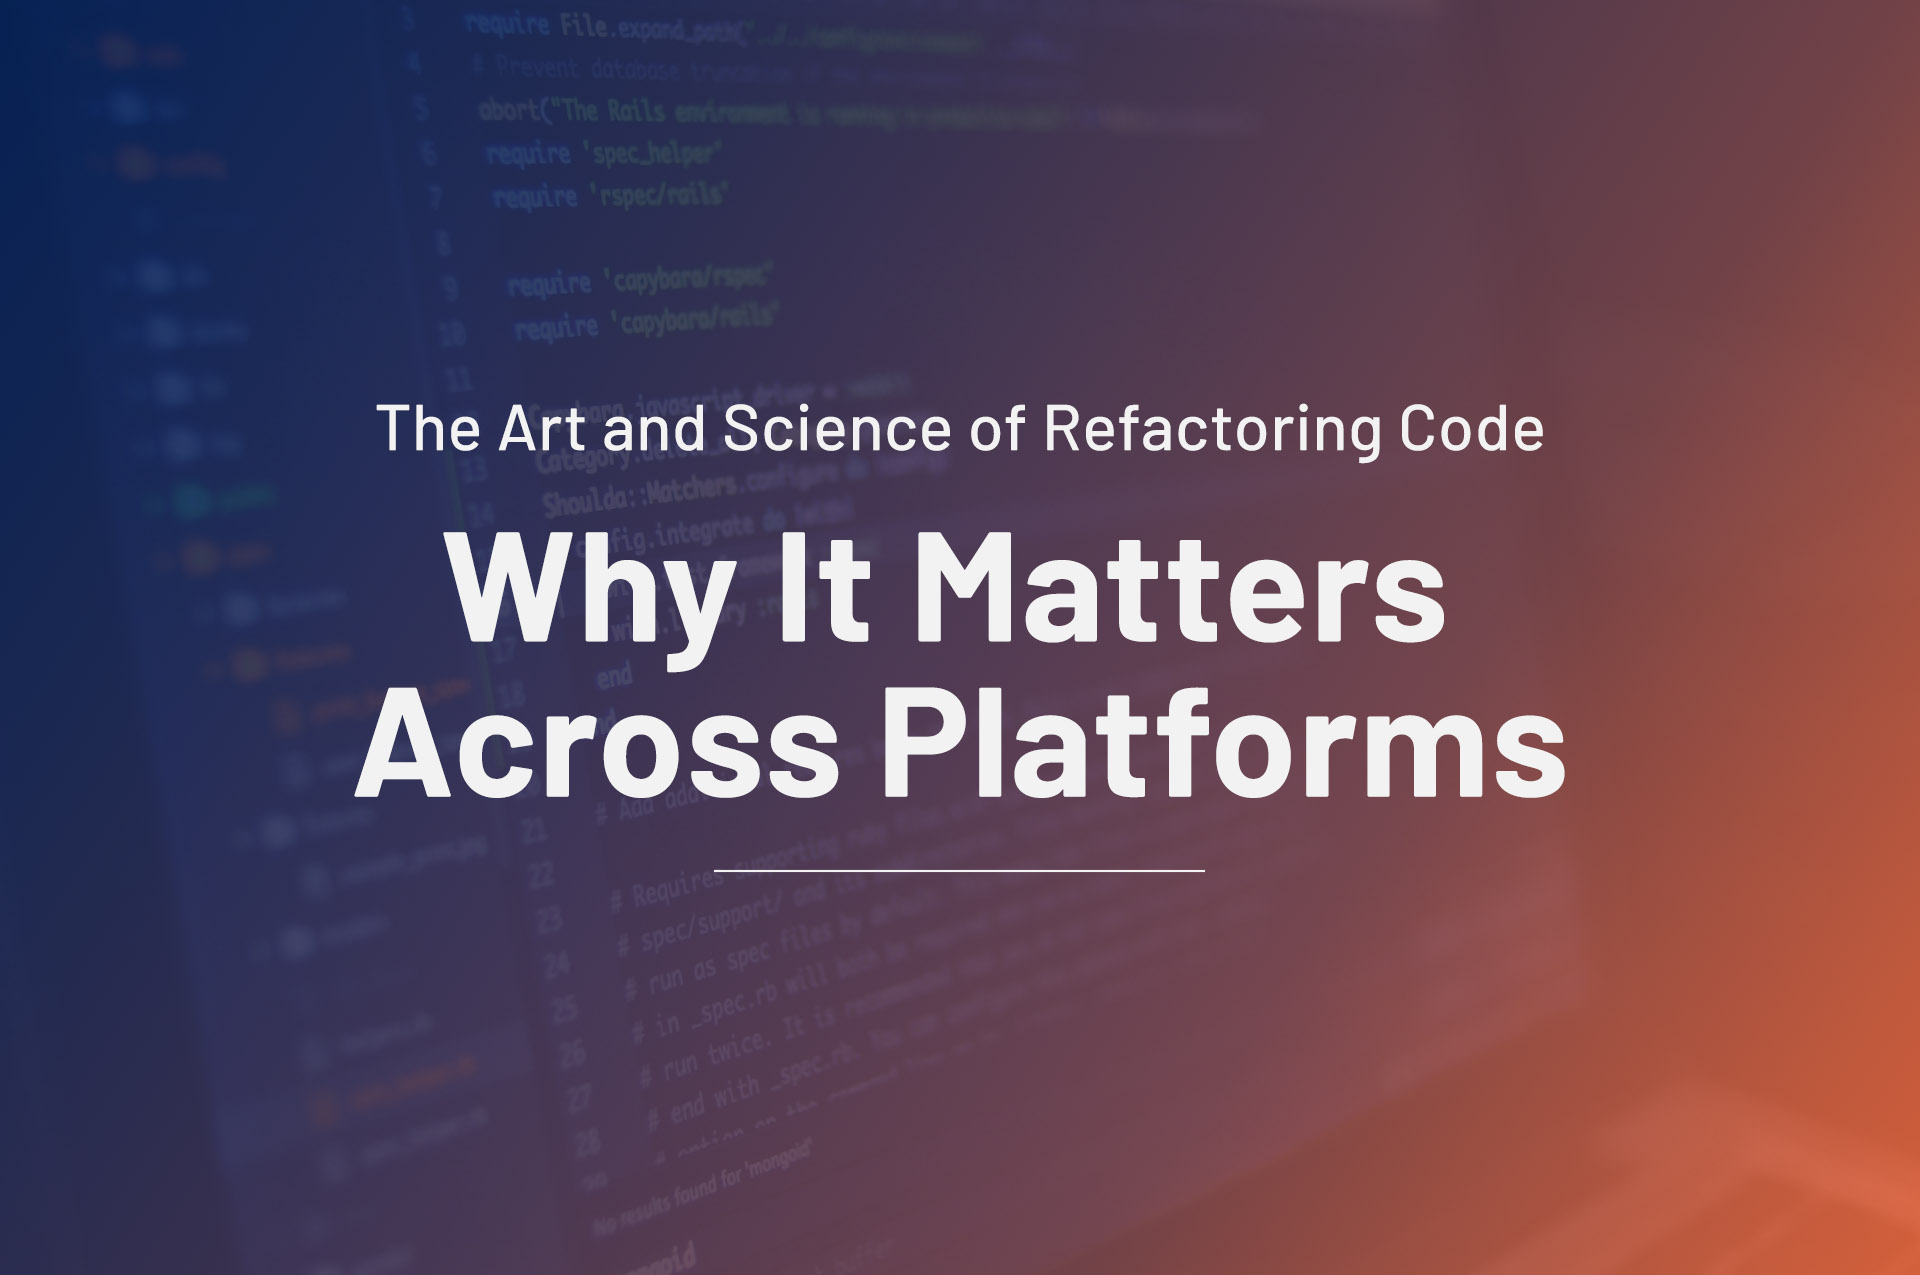 The Art and Science of Refactoring Code